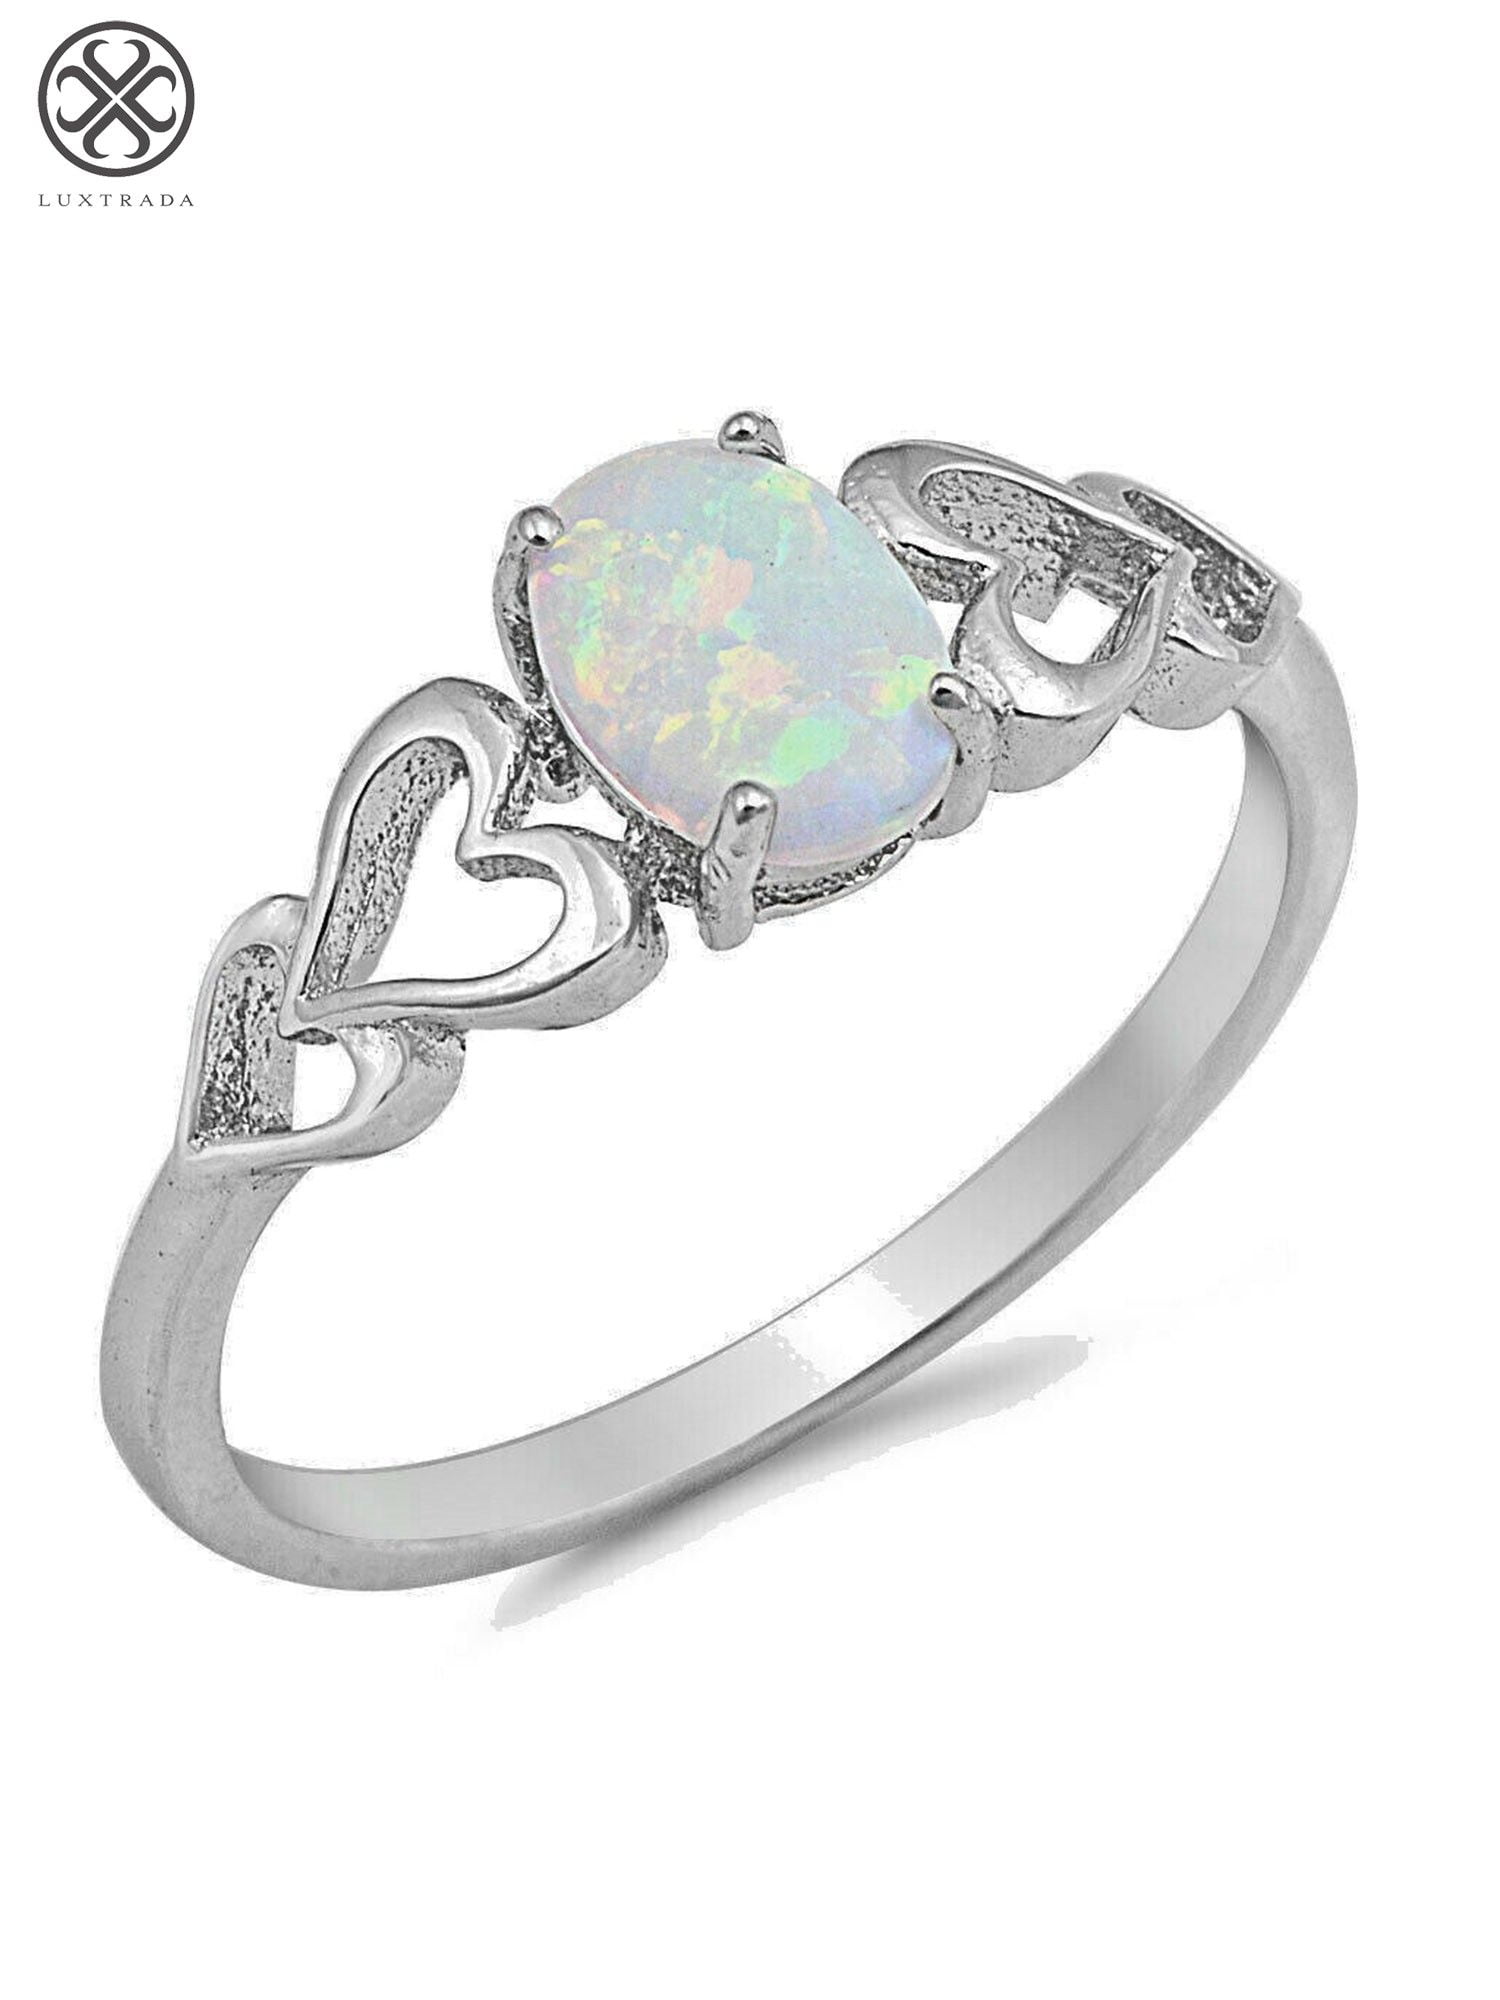 Fashion Women Flower White Fire Opal 925 Silver Jewelry Ring Wedding Band Gifts 